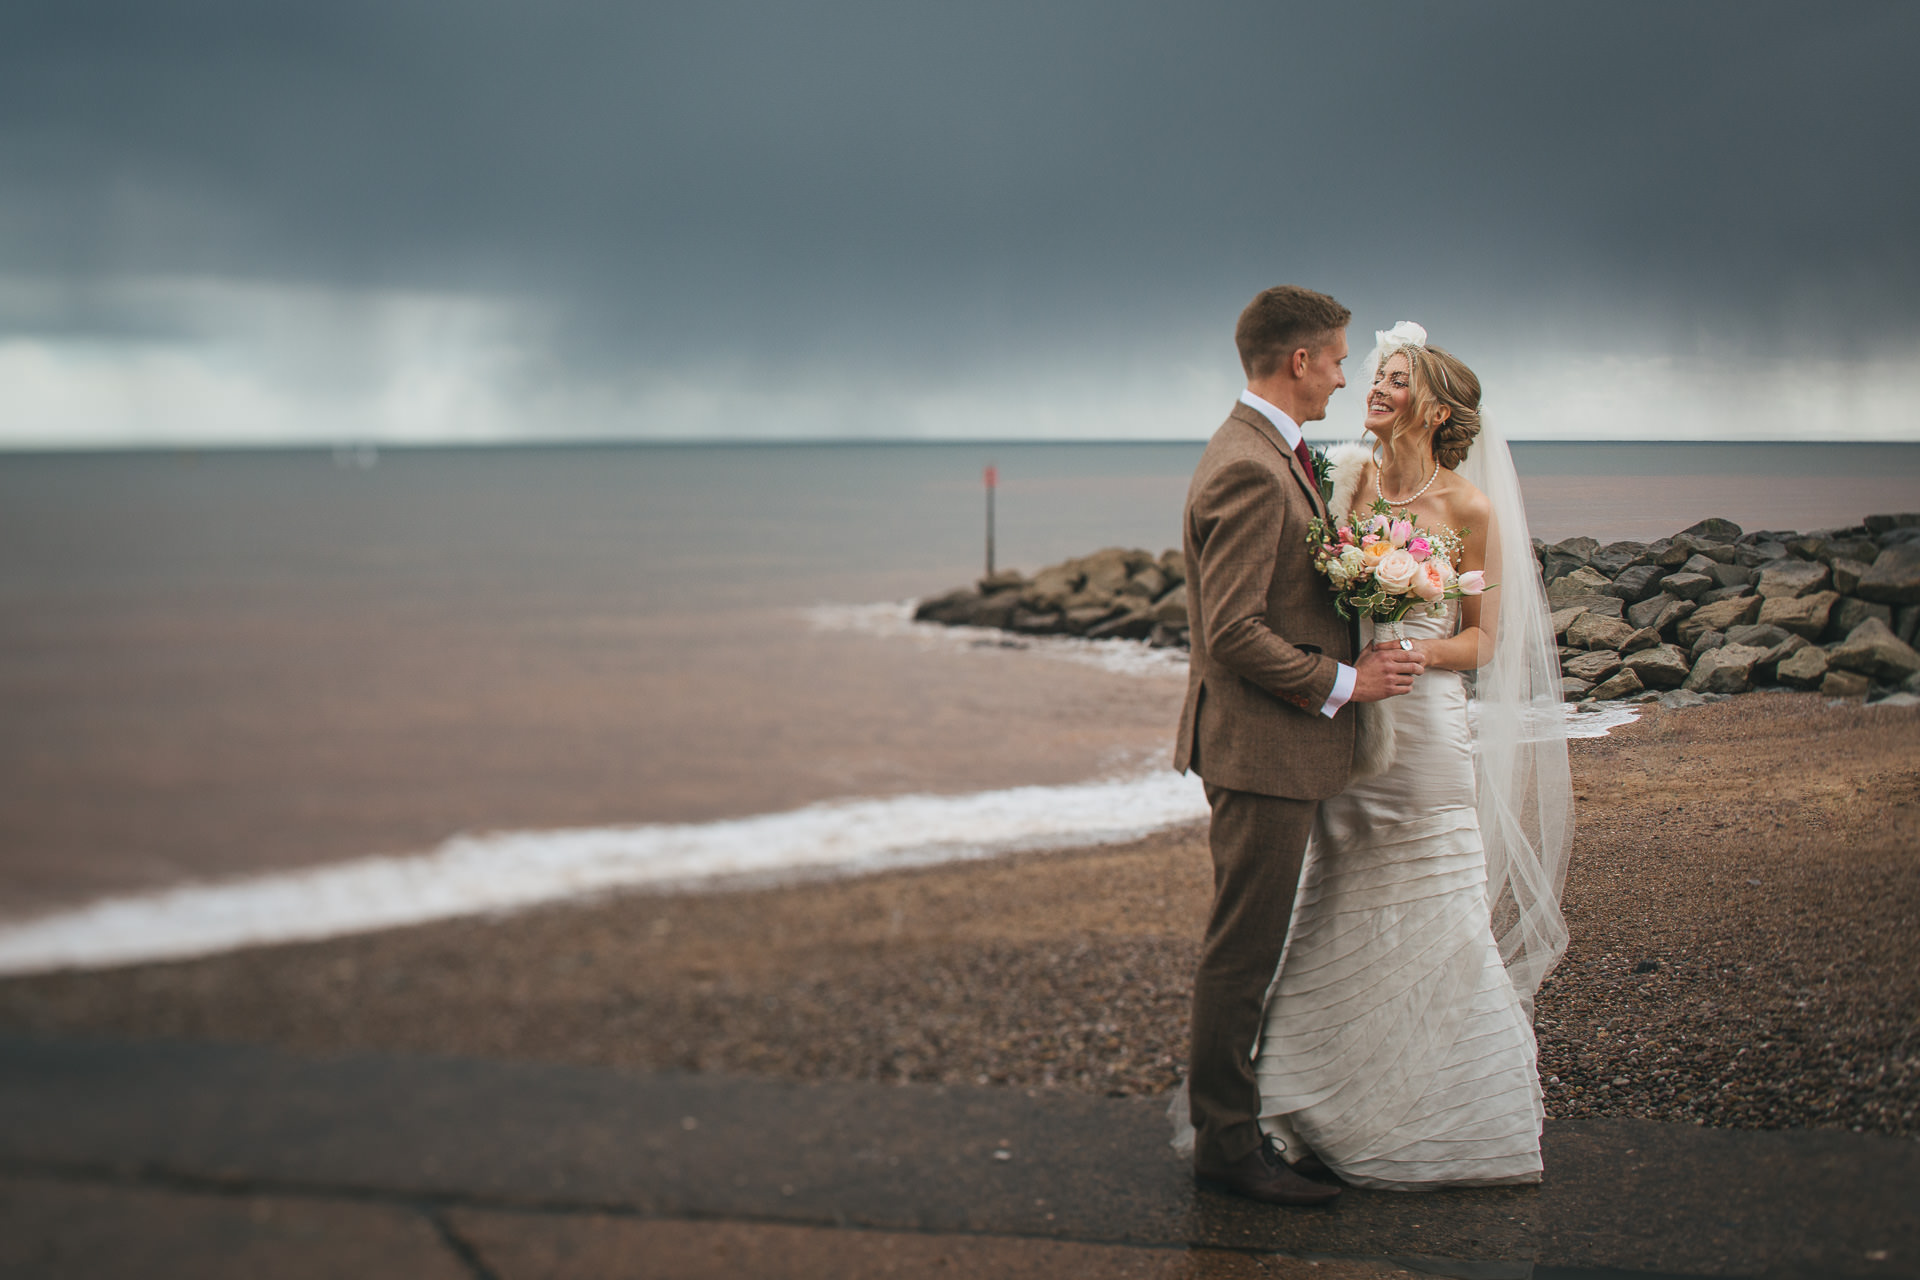 A bride and groom portrait when there is rain on your wedding day